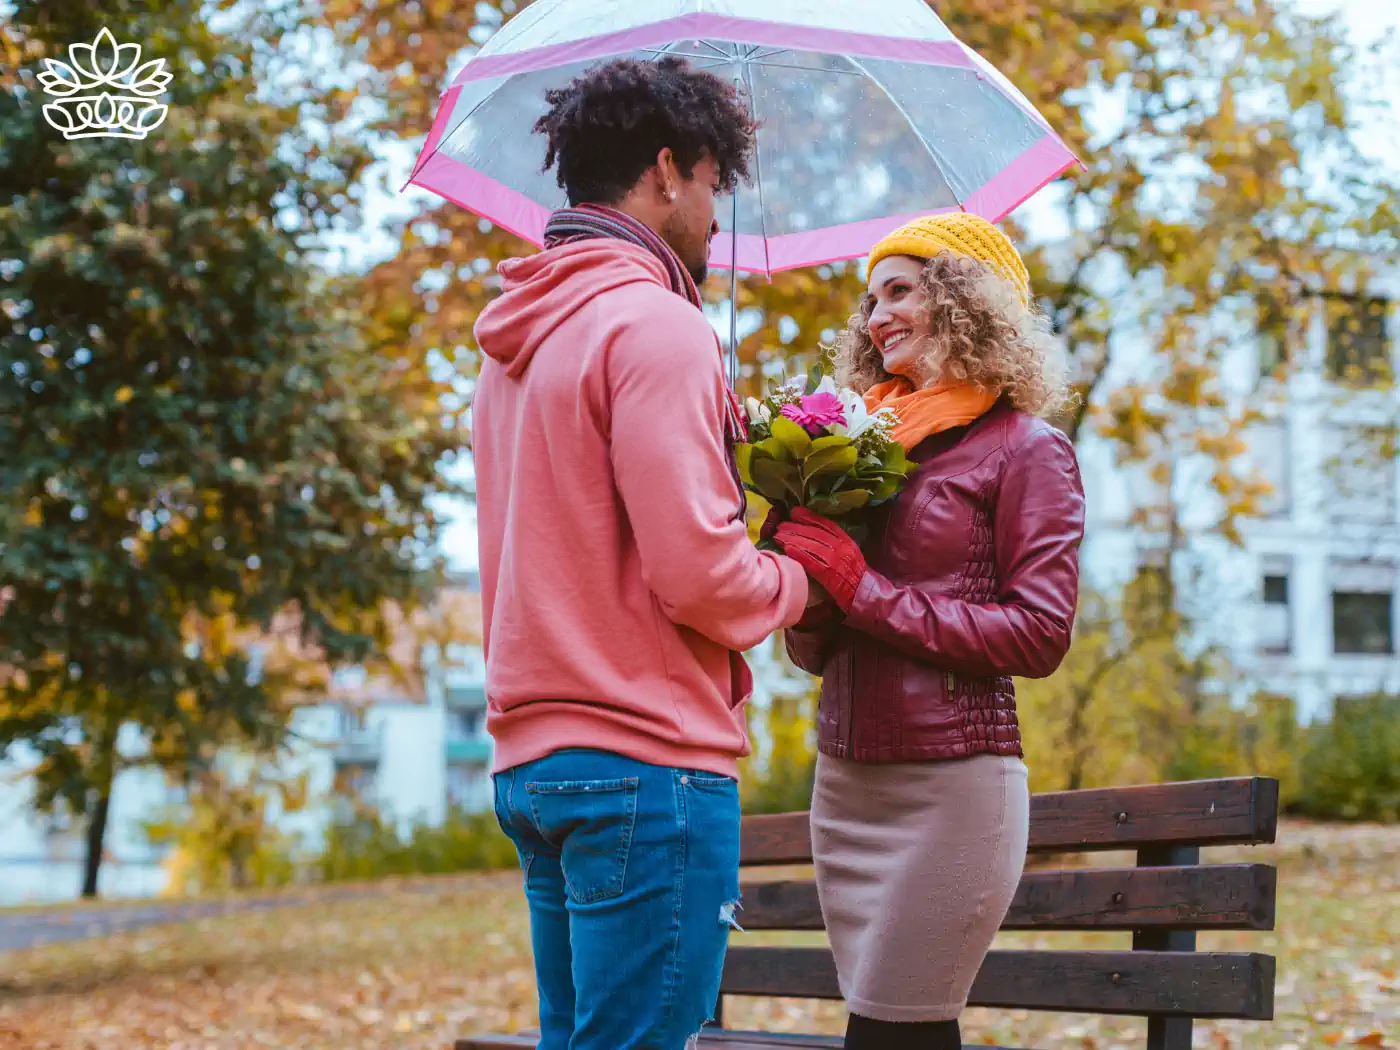 Young couple sharing a romantic moment under an umbrella in a park, with the man presenting a bouquet of mixed flowers, showcasing heartfelt gestures with flower bouquets under R500 from Fabulous Flowers and Gifts.